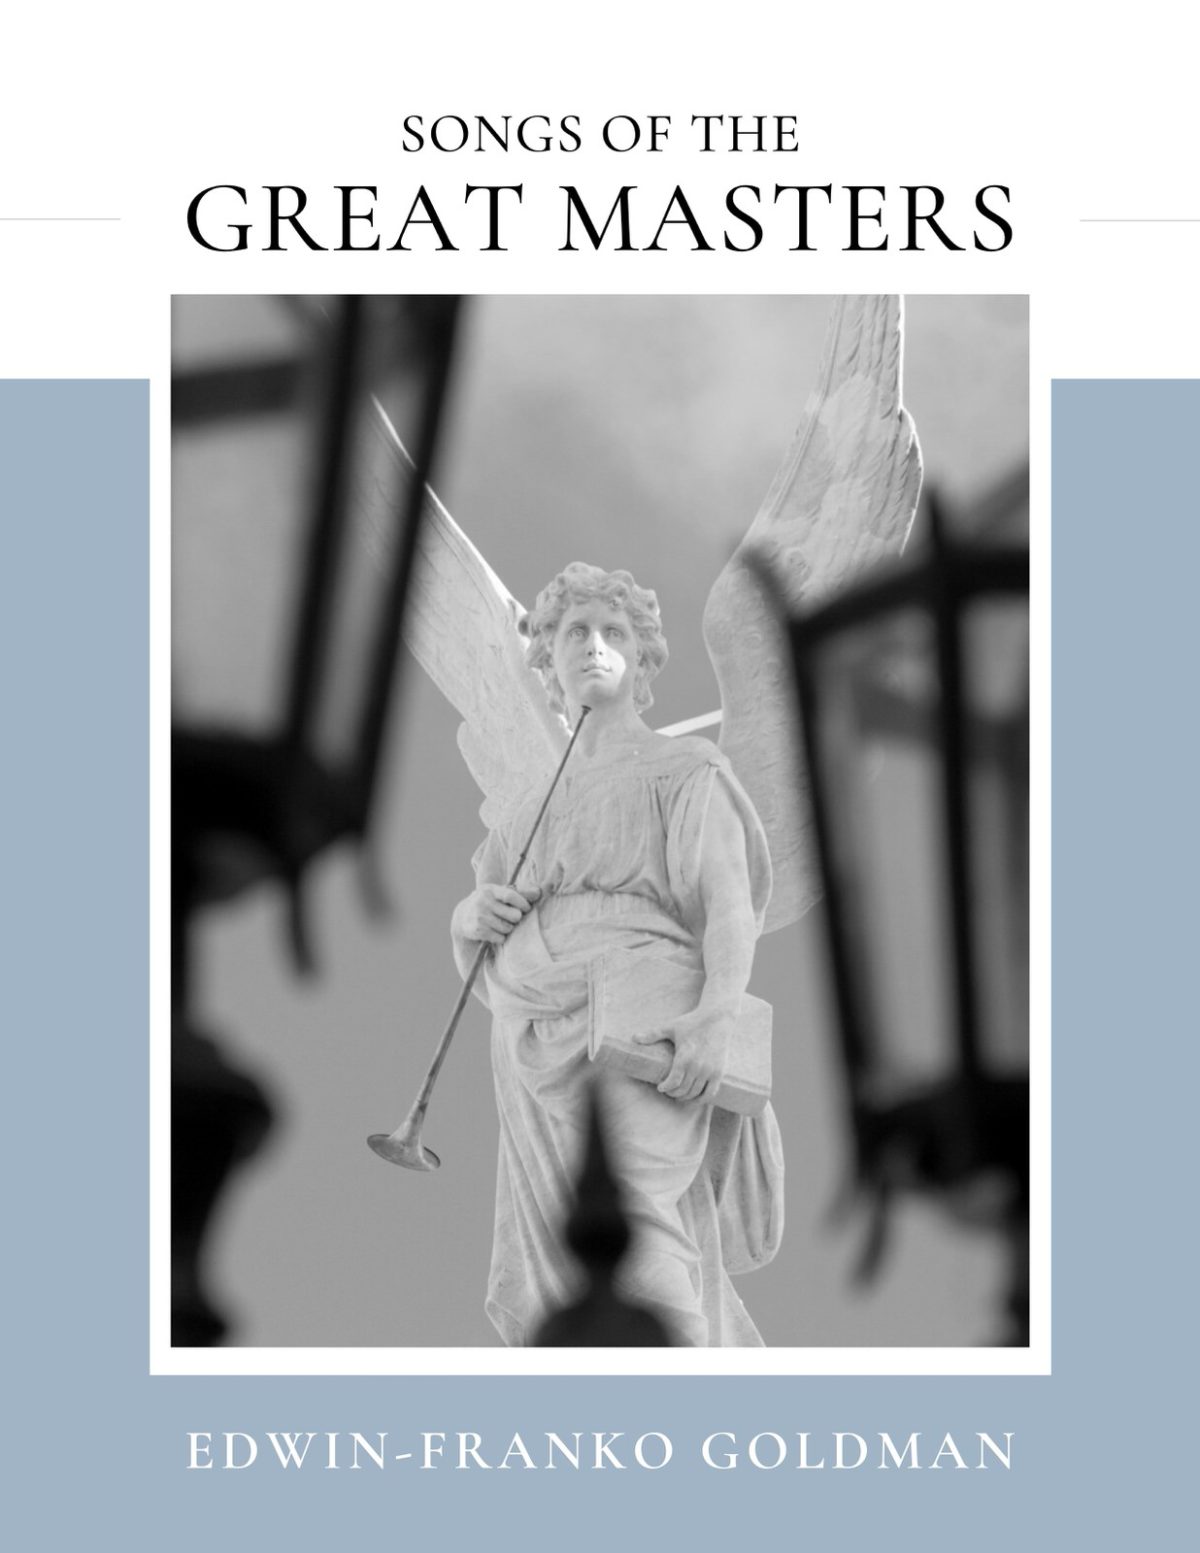 20 Songs of the Great Masters